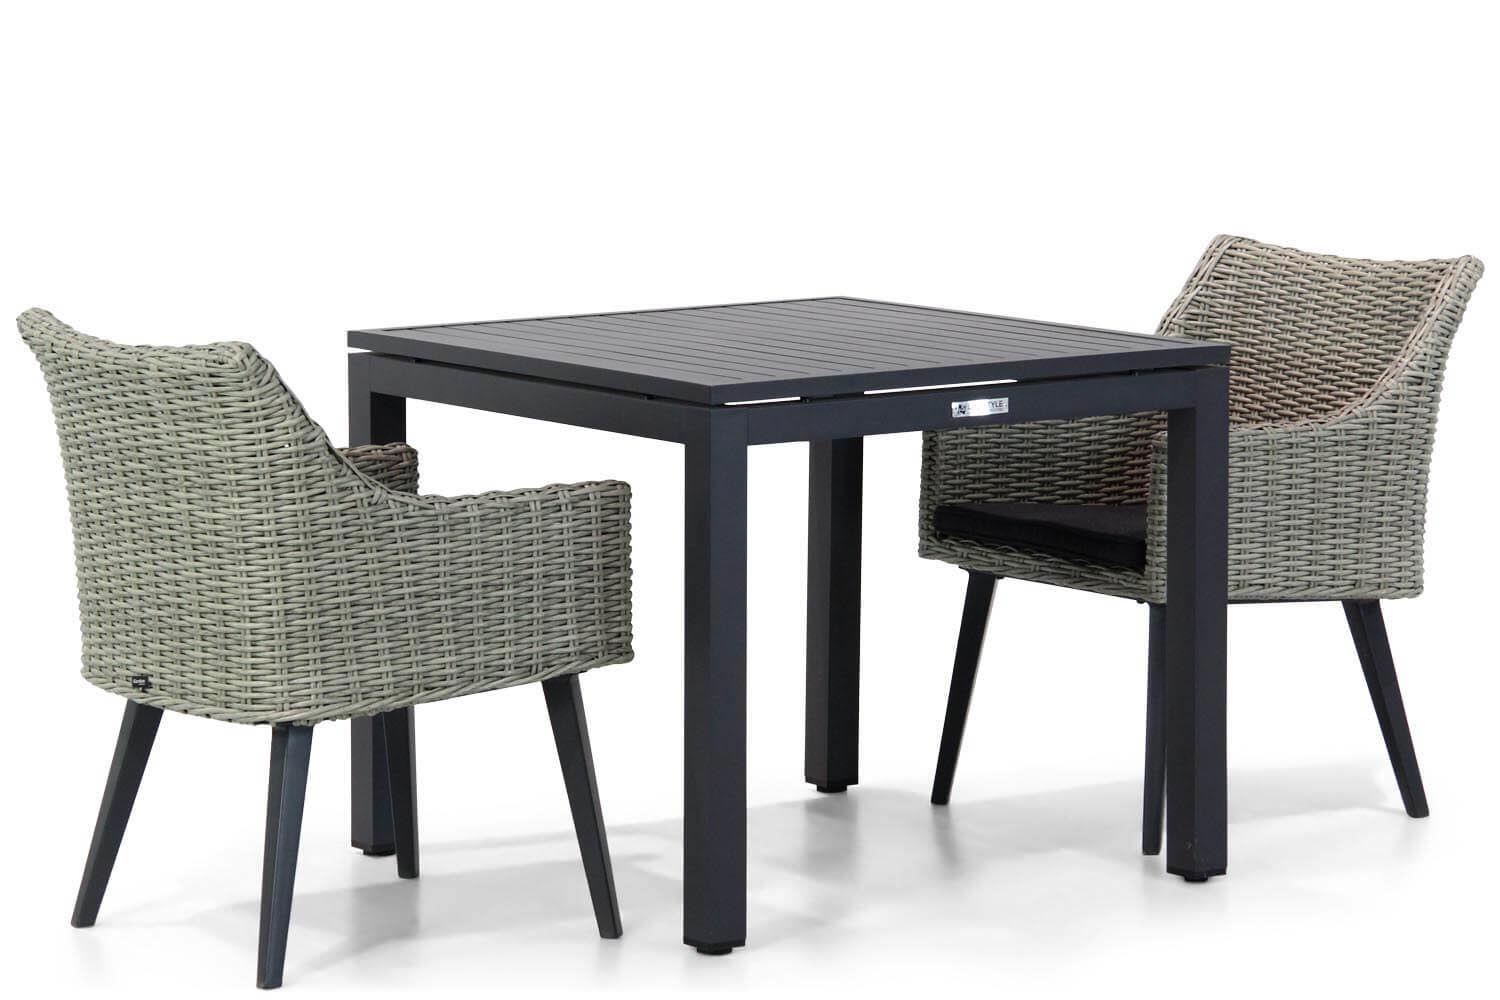 milton tuinstoel met concept tuintafel 4 persoons tuinset 2 persoons - Garden Collections Milton/Concept 90 cm dining tuinset 3-delig